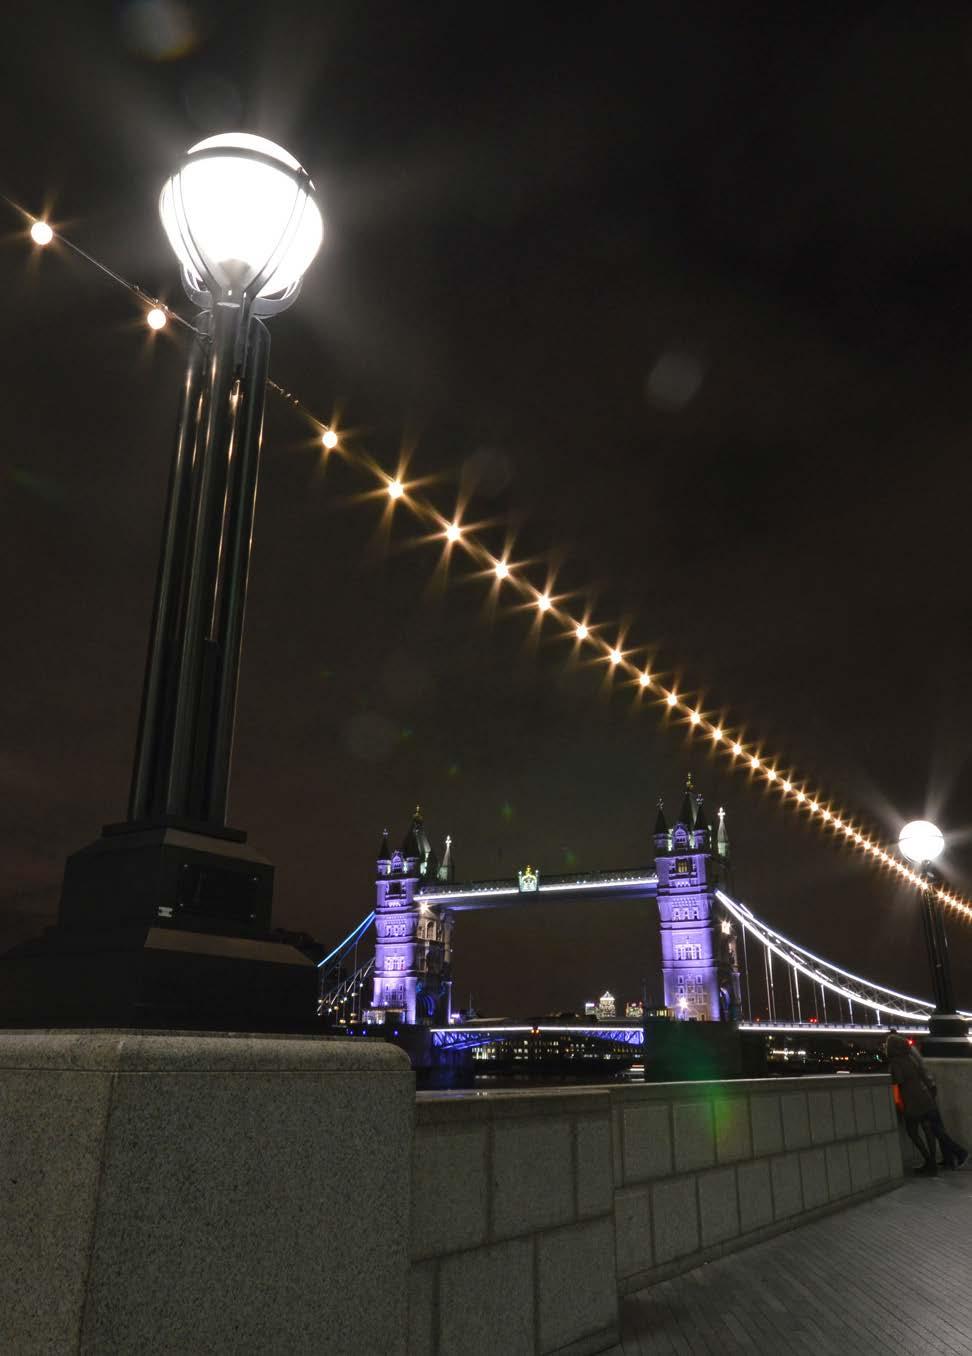 Background Situated on the Famous Thames Embankment, London, with the backdrop of